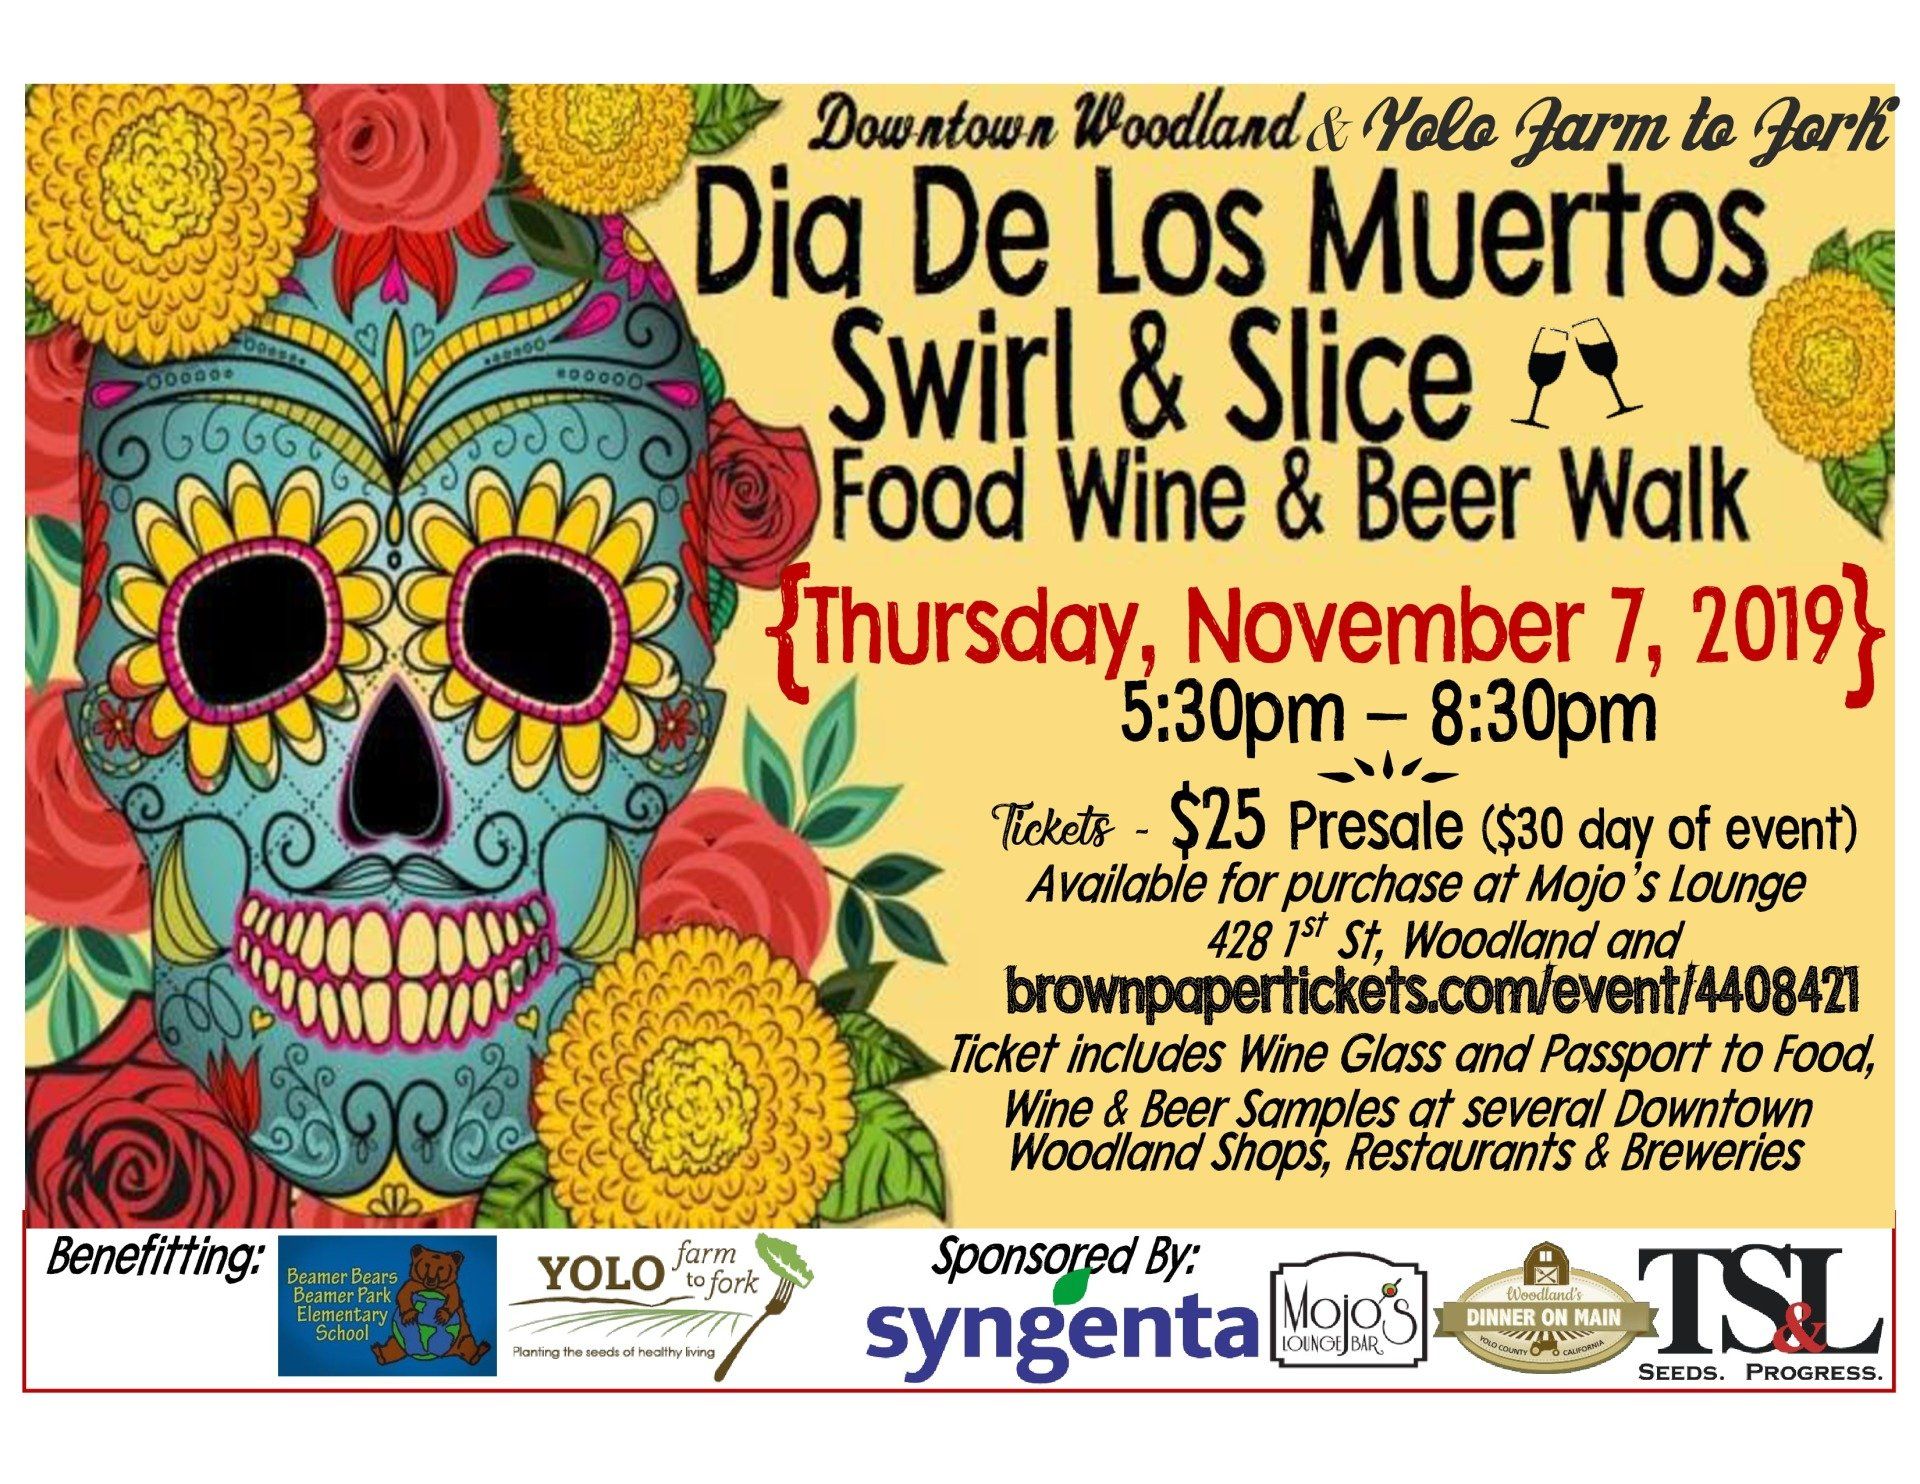 Swirl & Slice, a Food, Wine, and Beer Walk, will benefit Yolo Farm to Fork’s Growing Lunch Program a